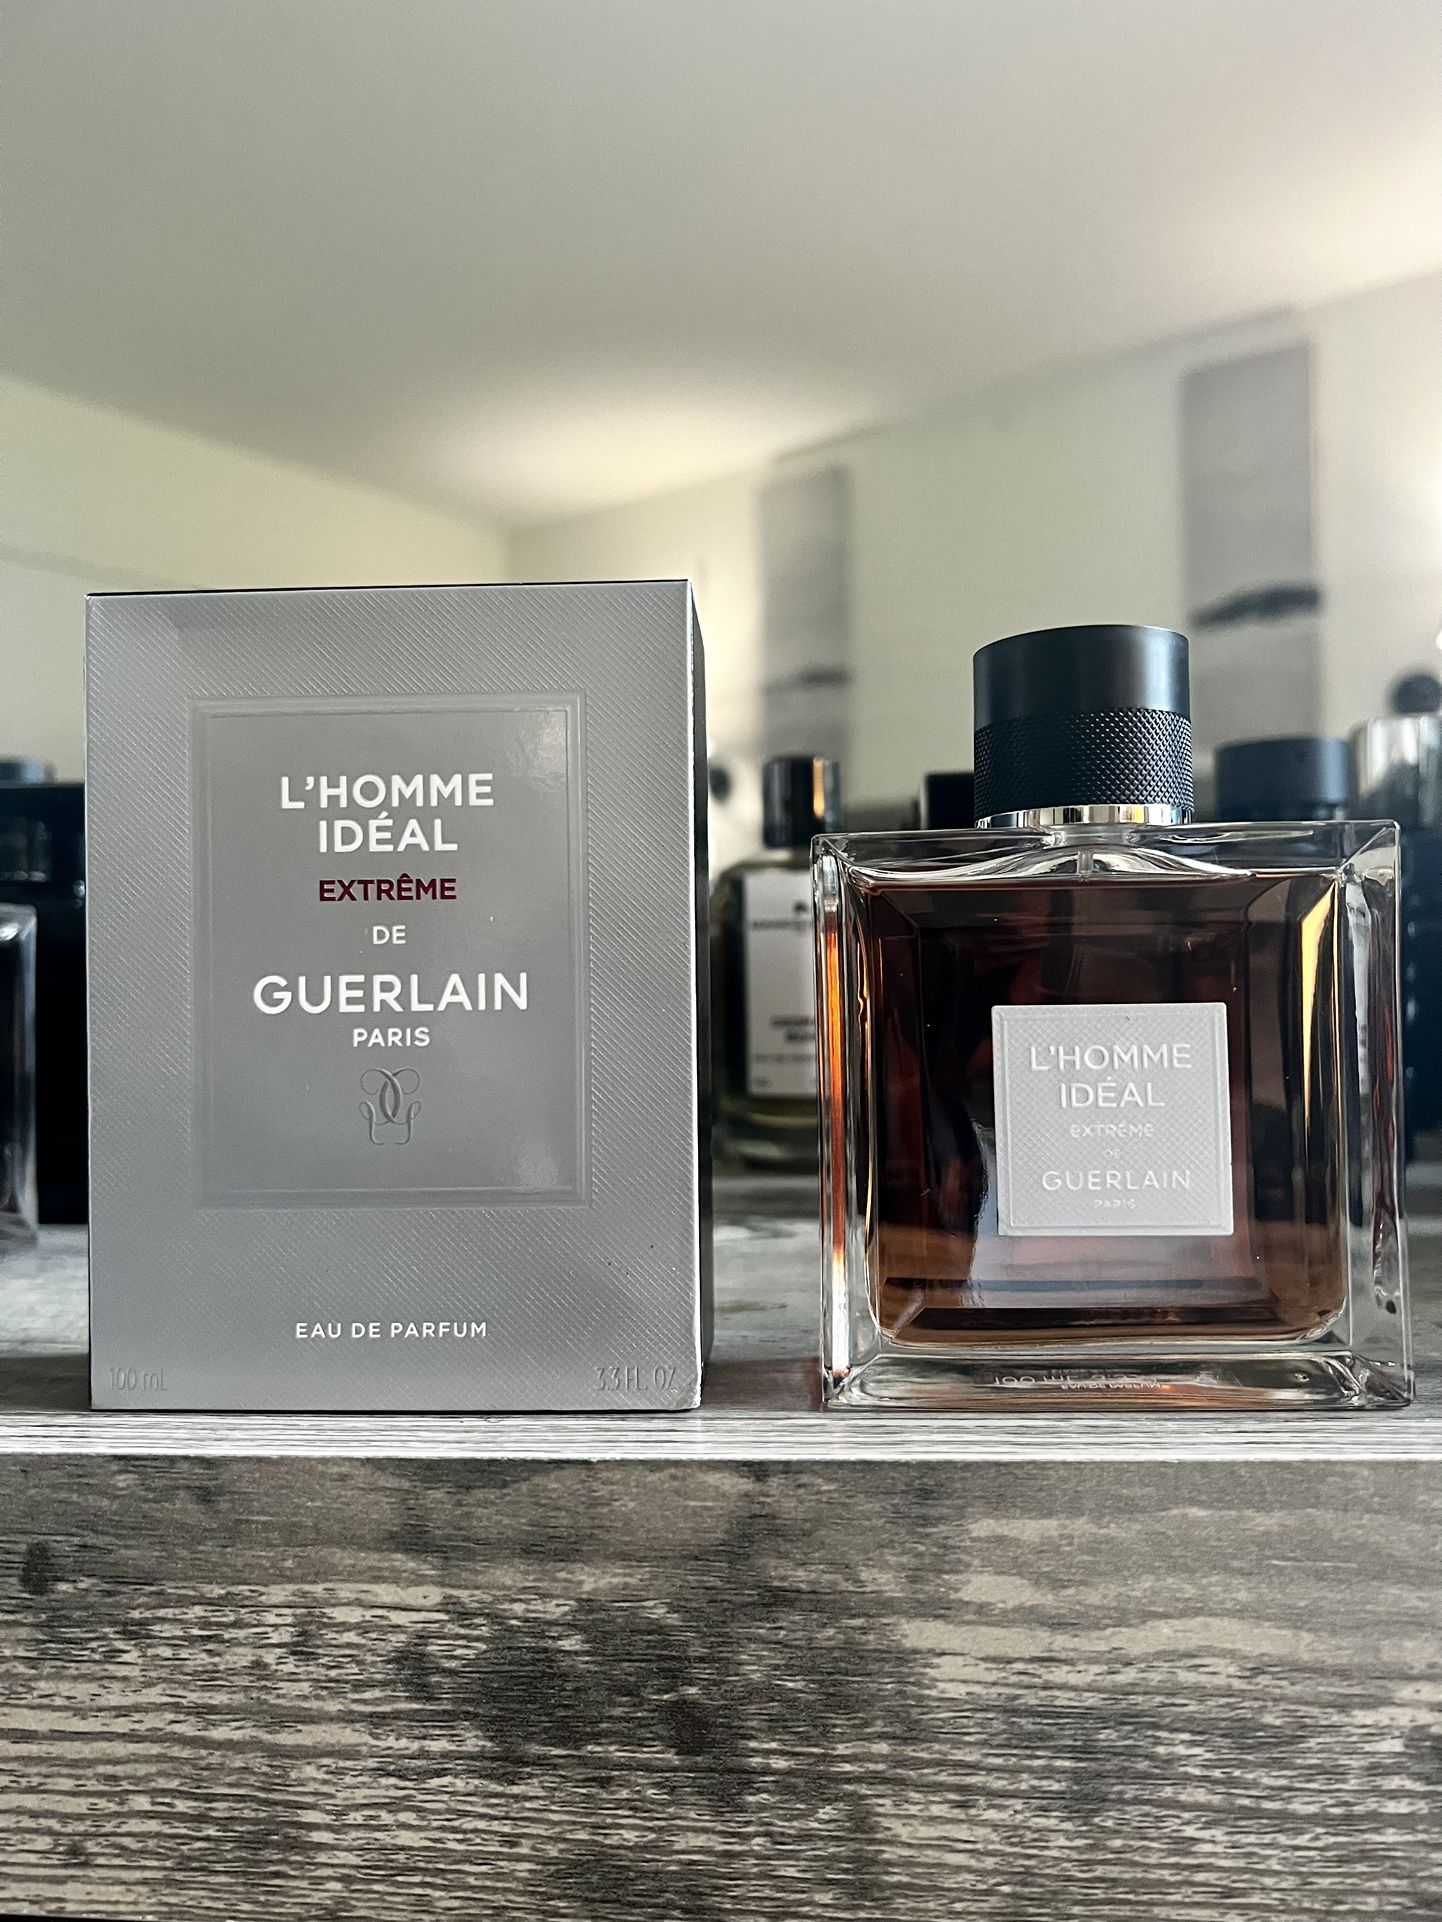 Guerlain L'homme Ideal Extreme 100ML EDP for Sale in North Brunswick  Township, NJ - OfferUp